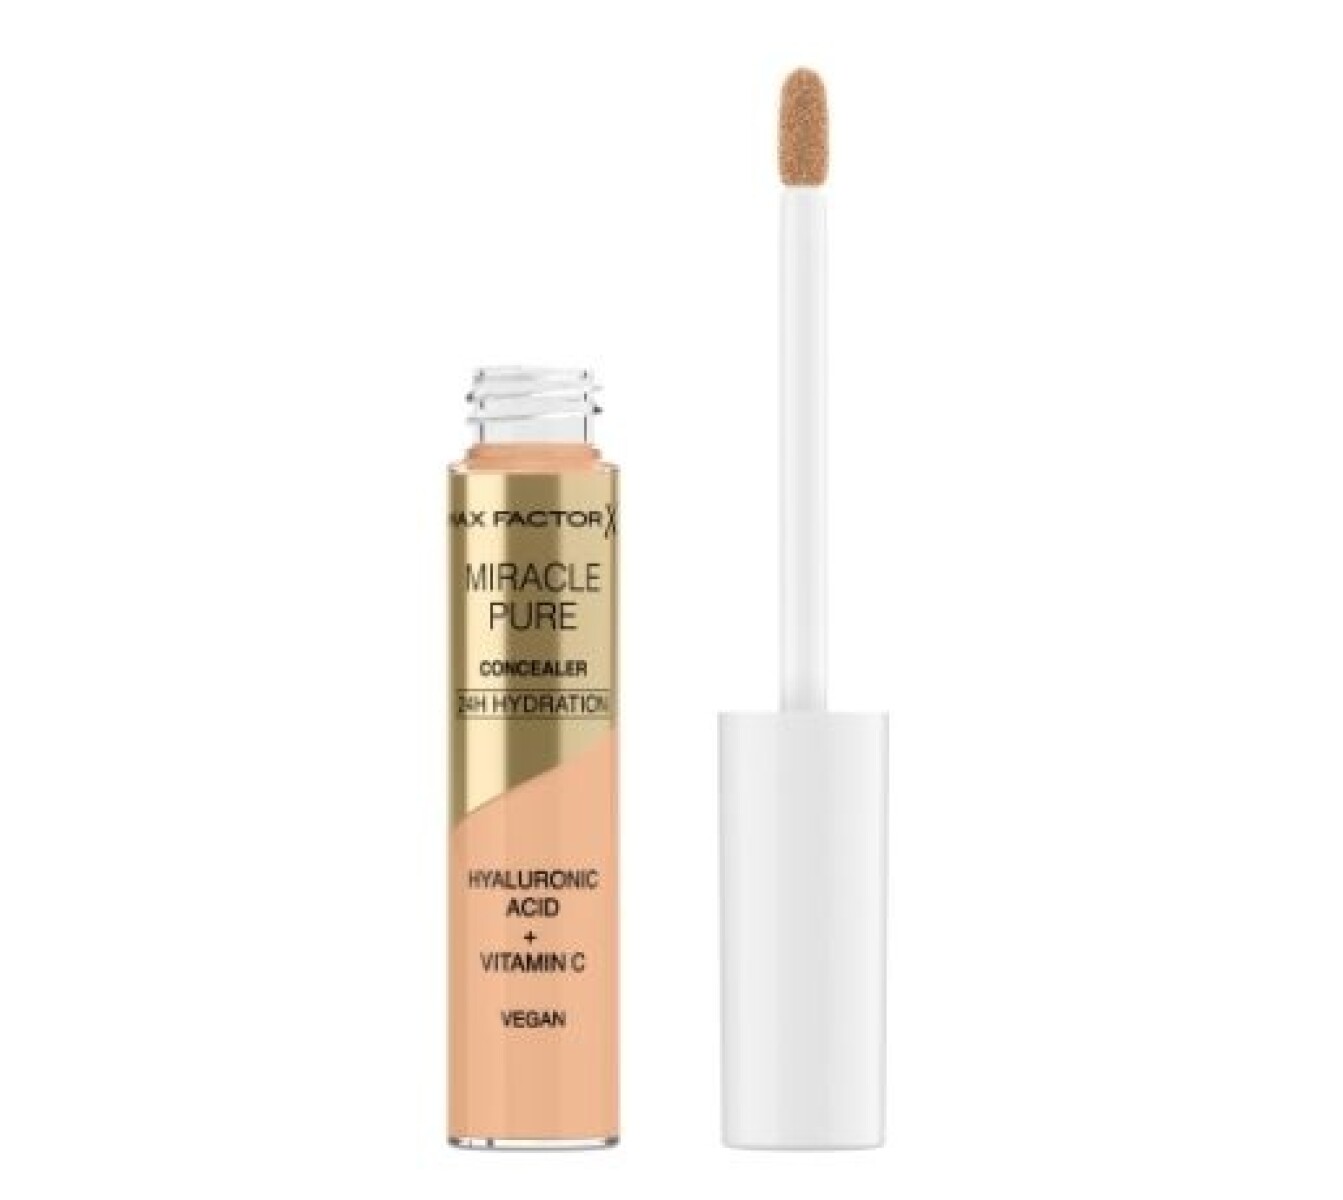 Mf Miracle Pure Concealer 010 